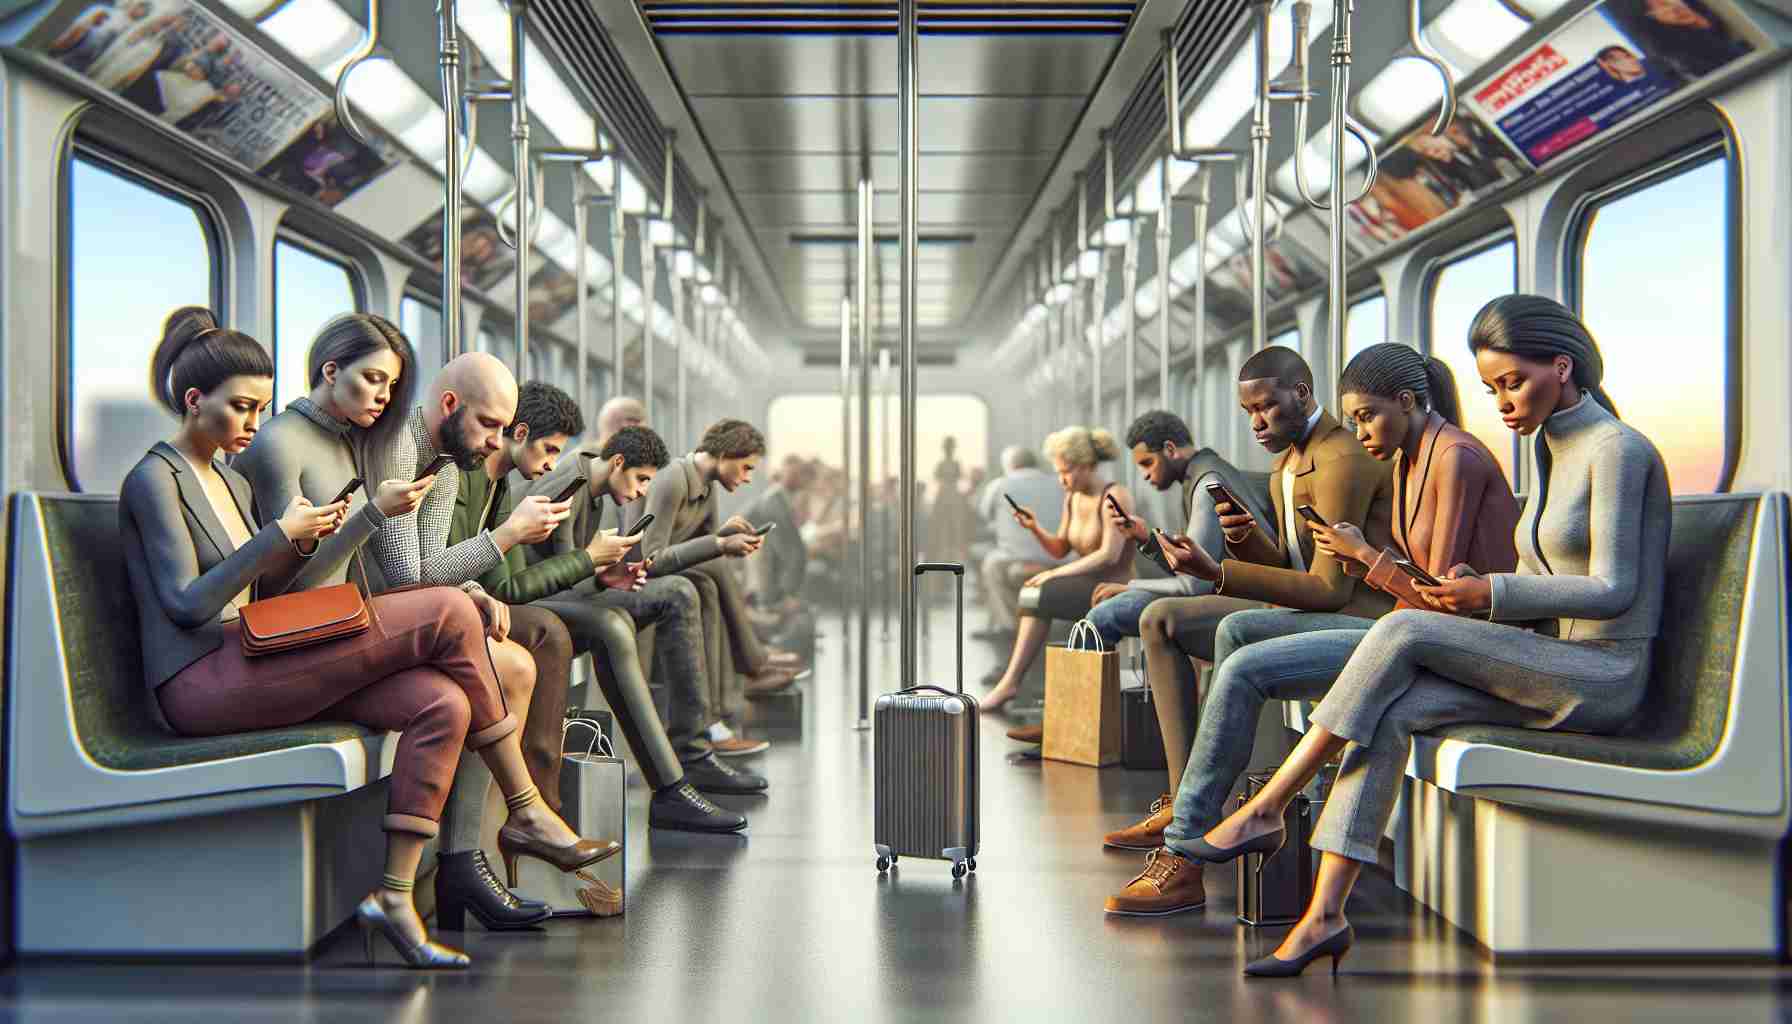 Redefining Social Interaction in the Smartphone Era